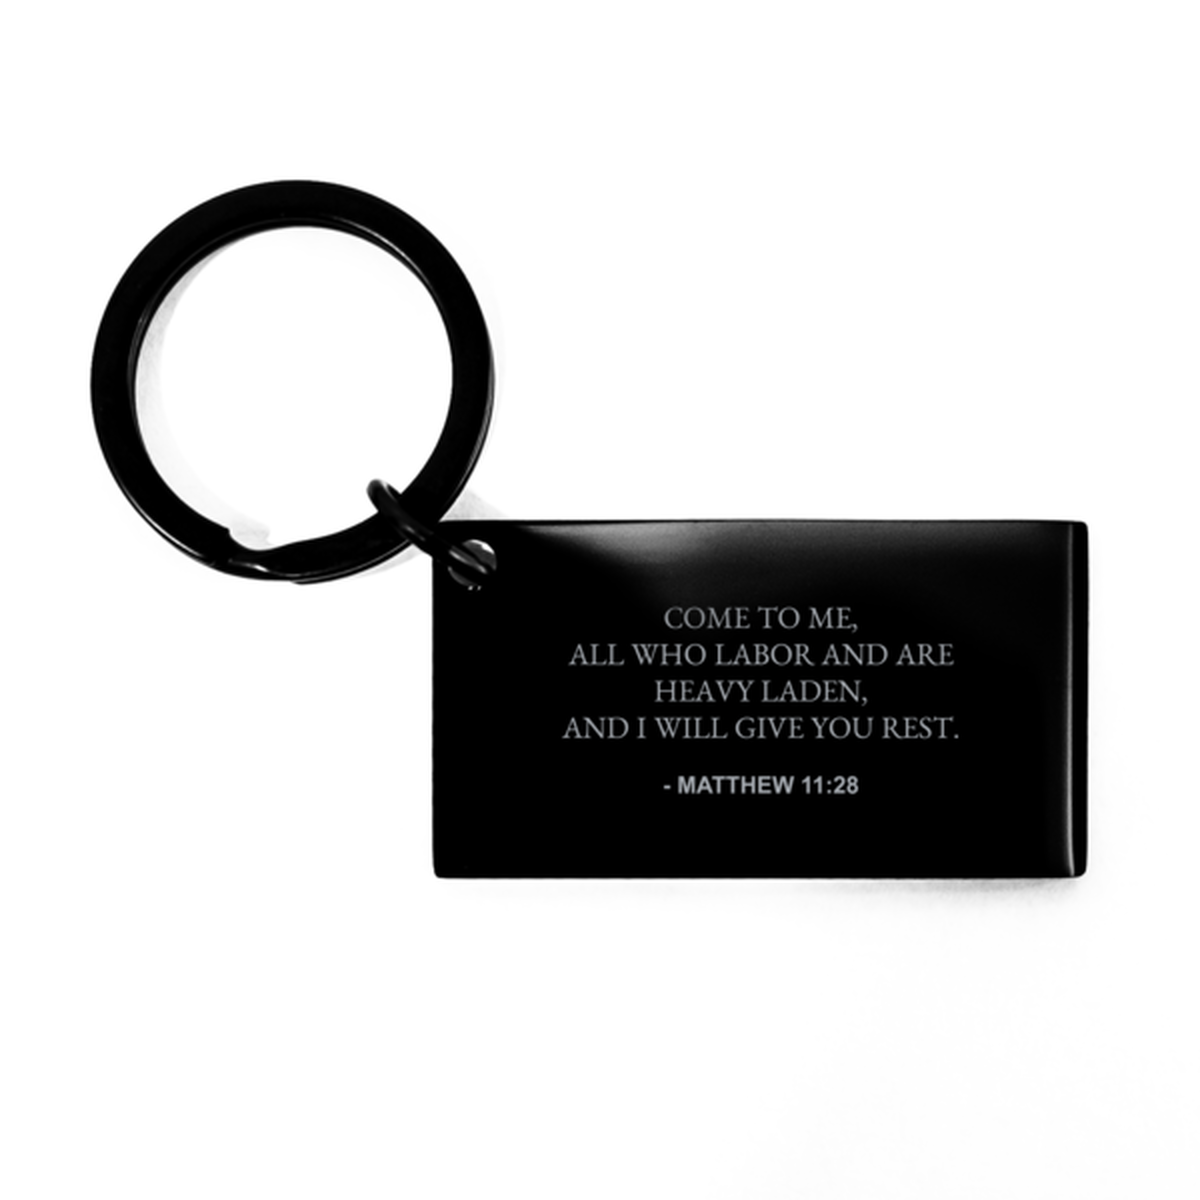 Bible Verse Black Keychain, Matthew 11:28 Come To Me All Who Labor And Are Heavy Laden,, Christian Inspirational Key Ring Gifts For Men Women